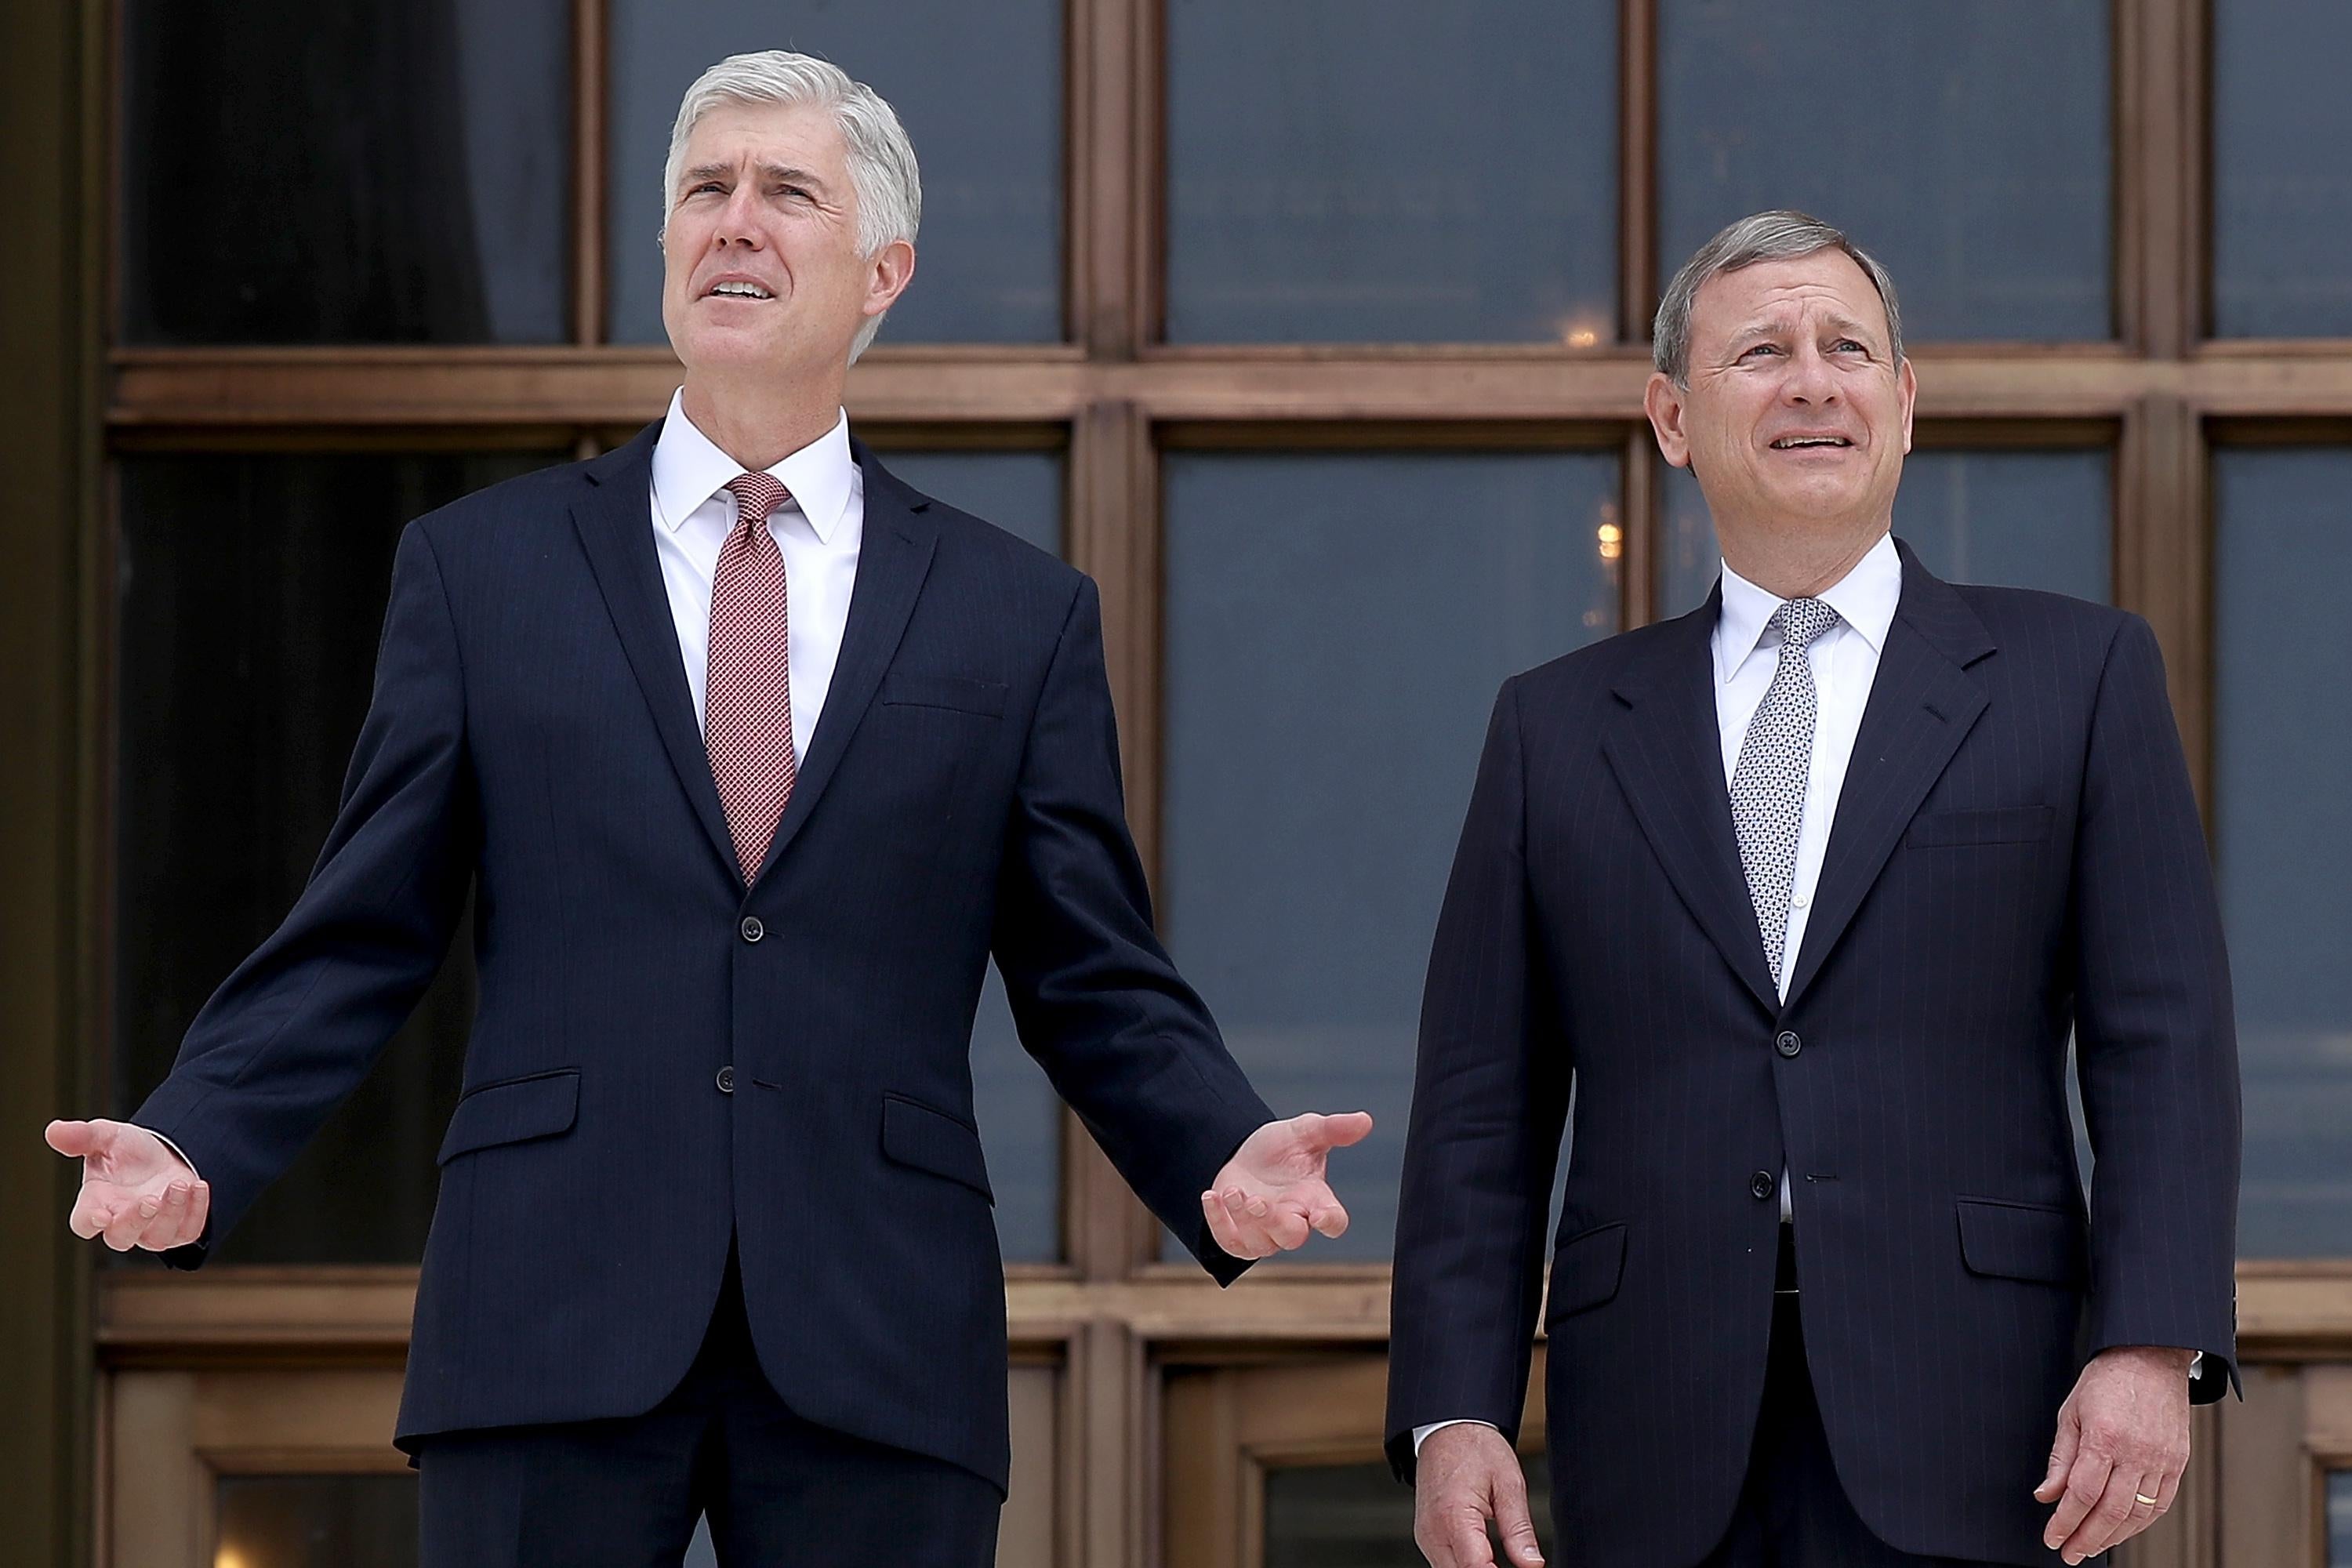 Neil Gorsuch and John Roberts talking to each other in front of the Supreme Court.